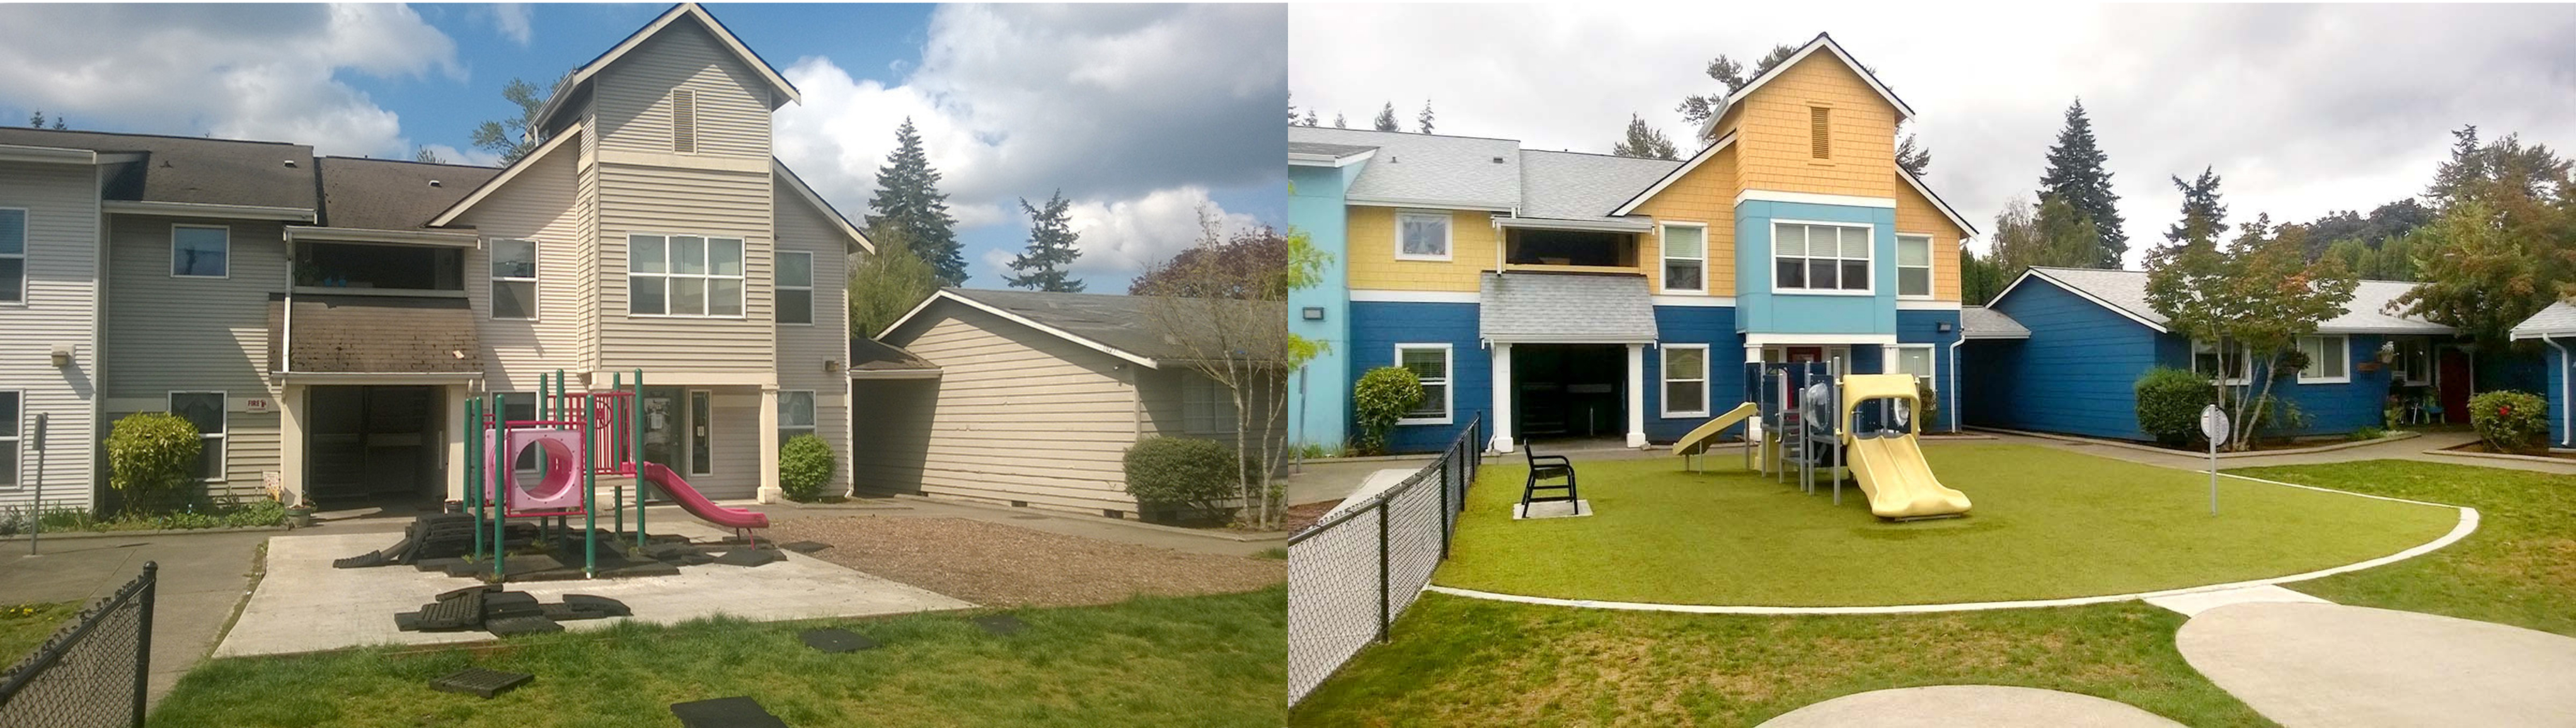 Beachwood before and after (Housing Hope)